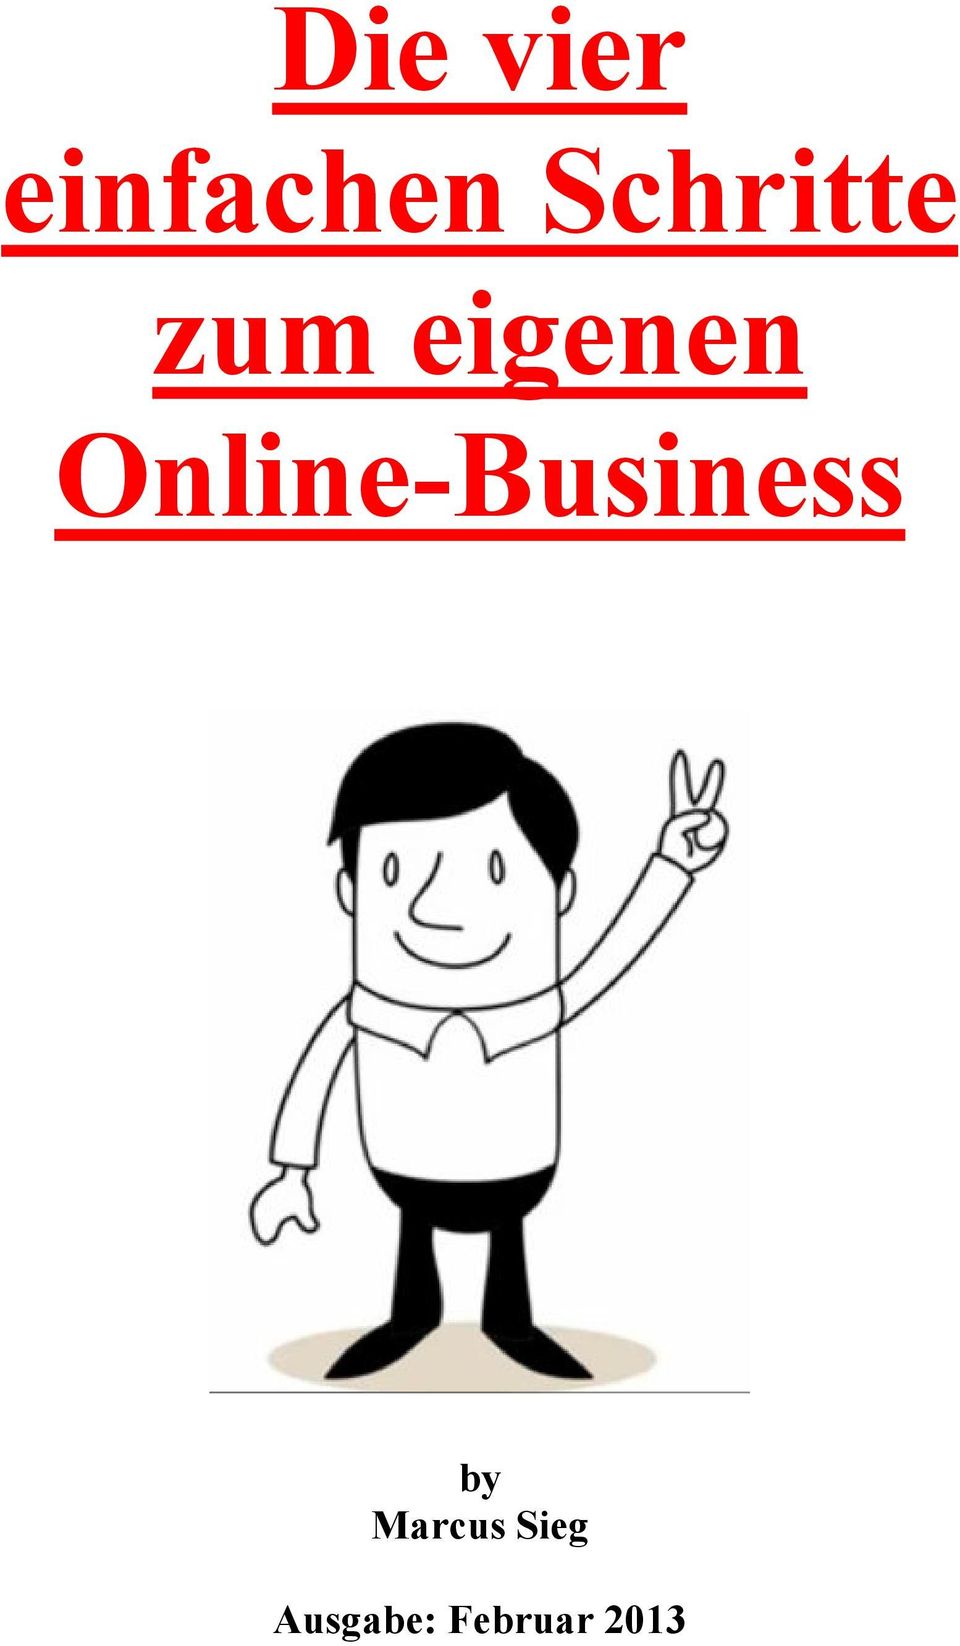 Online-Business by